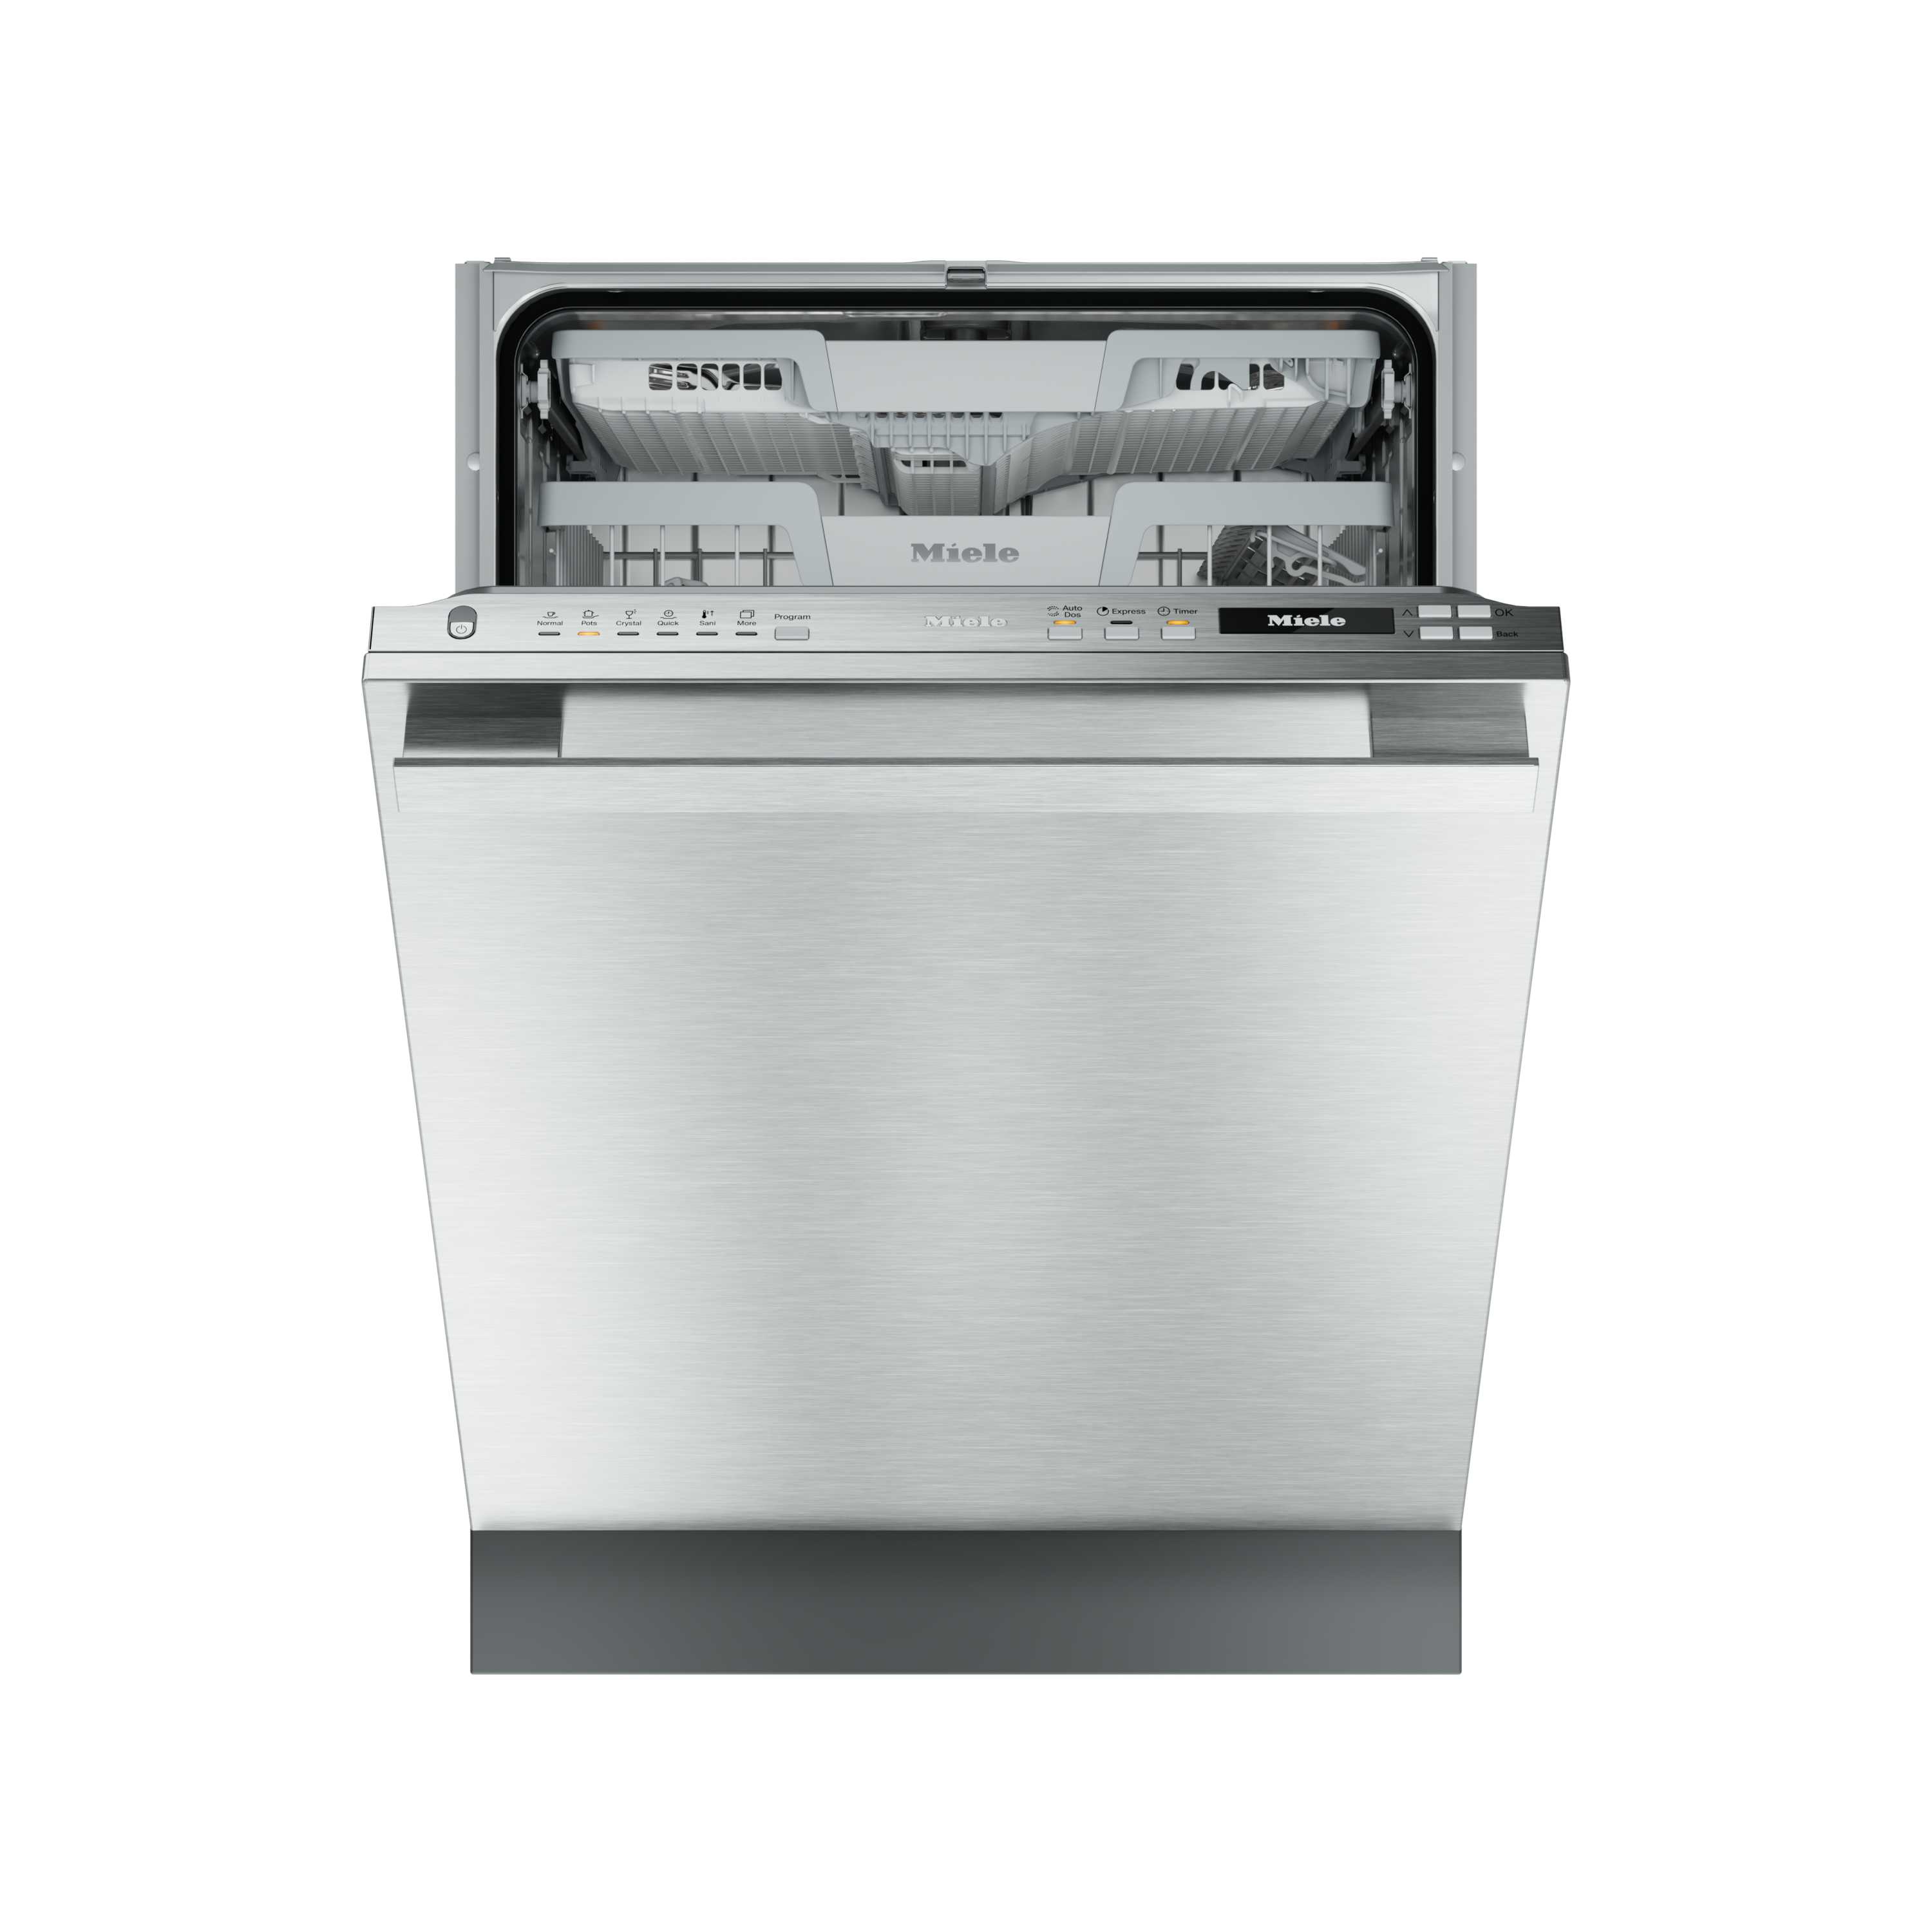 Miele AutoDos Top Control 24-in Smart Built-In Dishwasher With